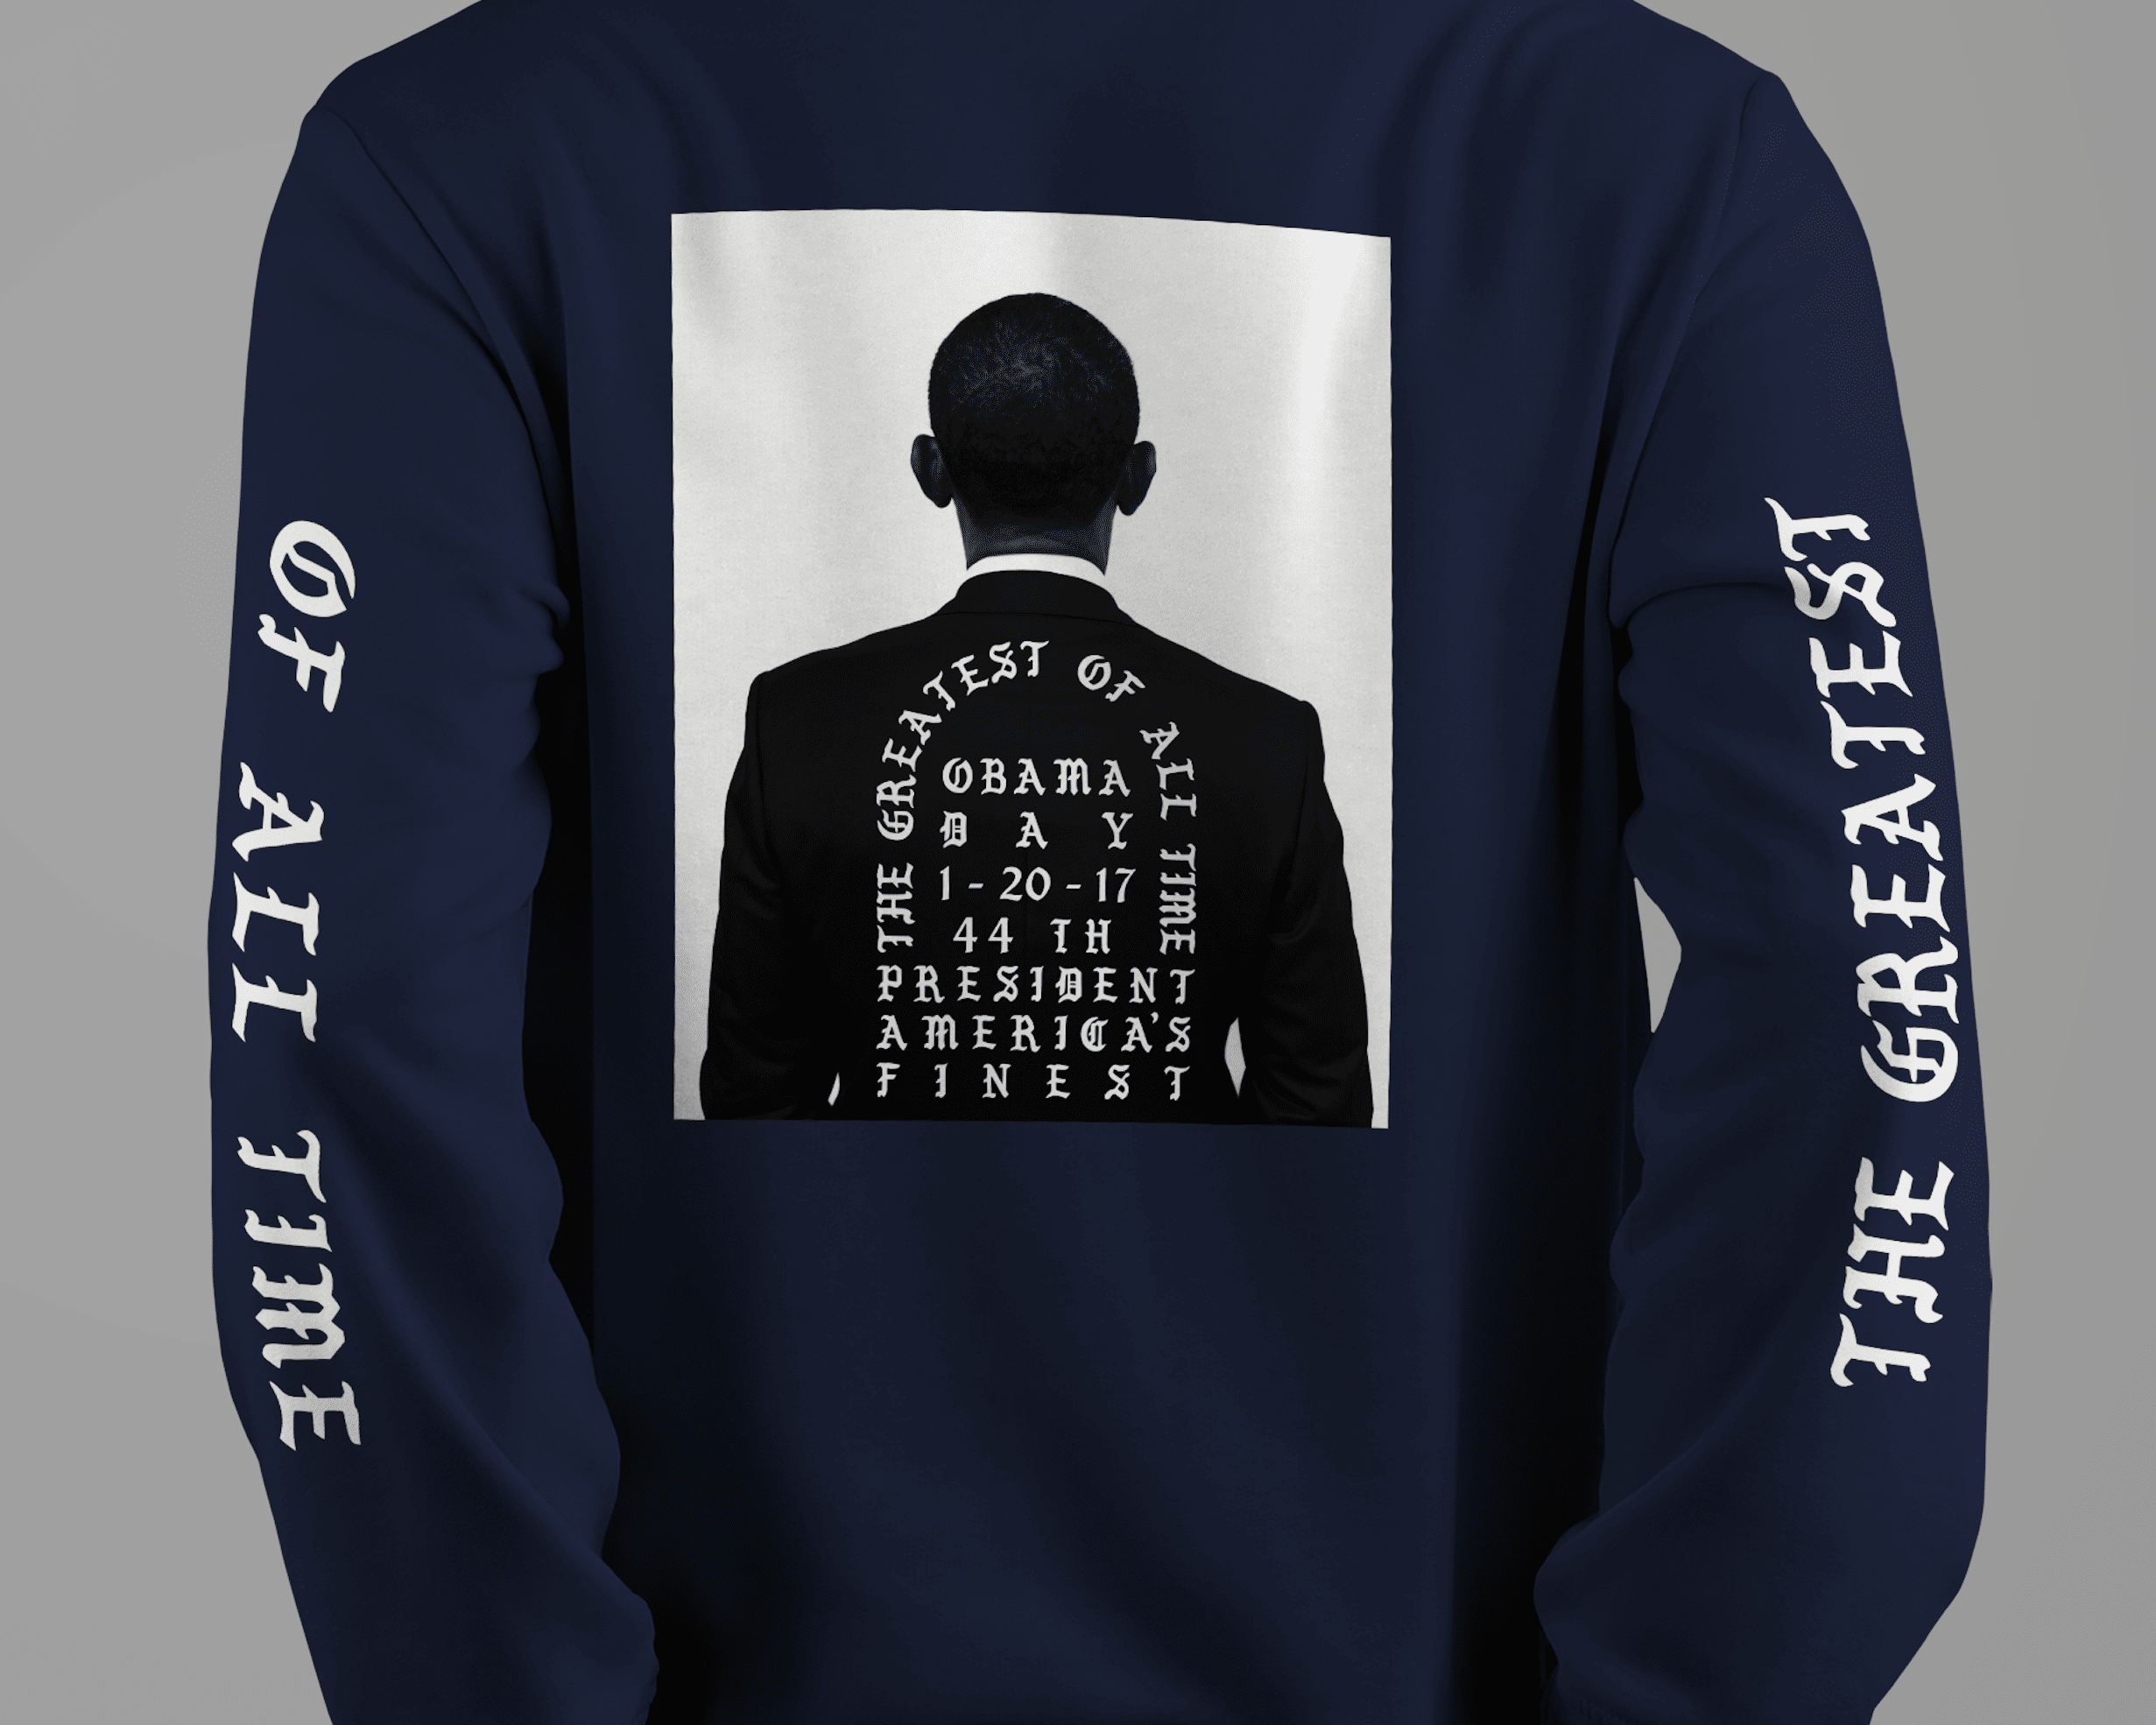 Obama The GOAT - Navy Hoodie